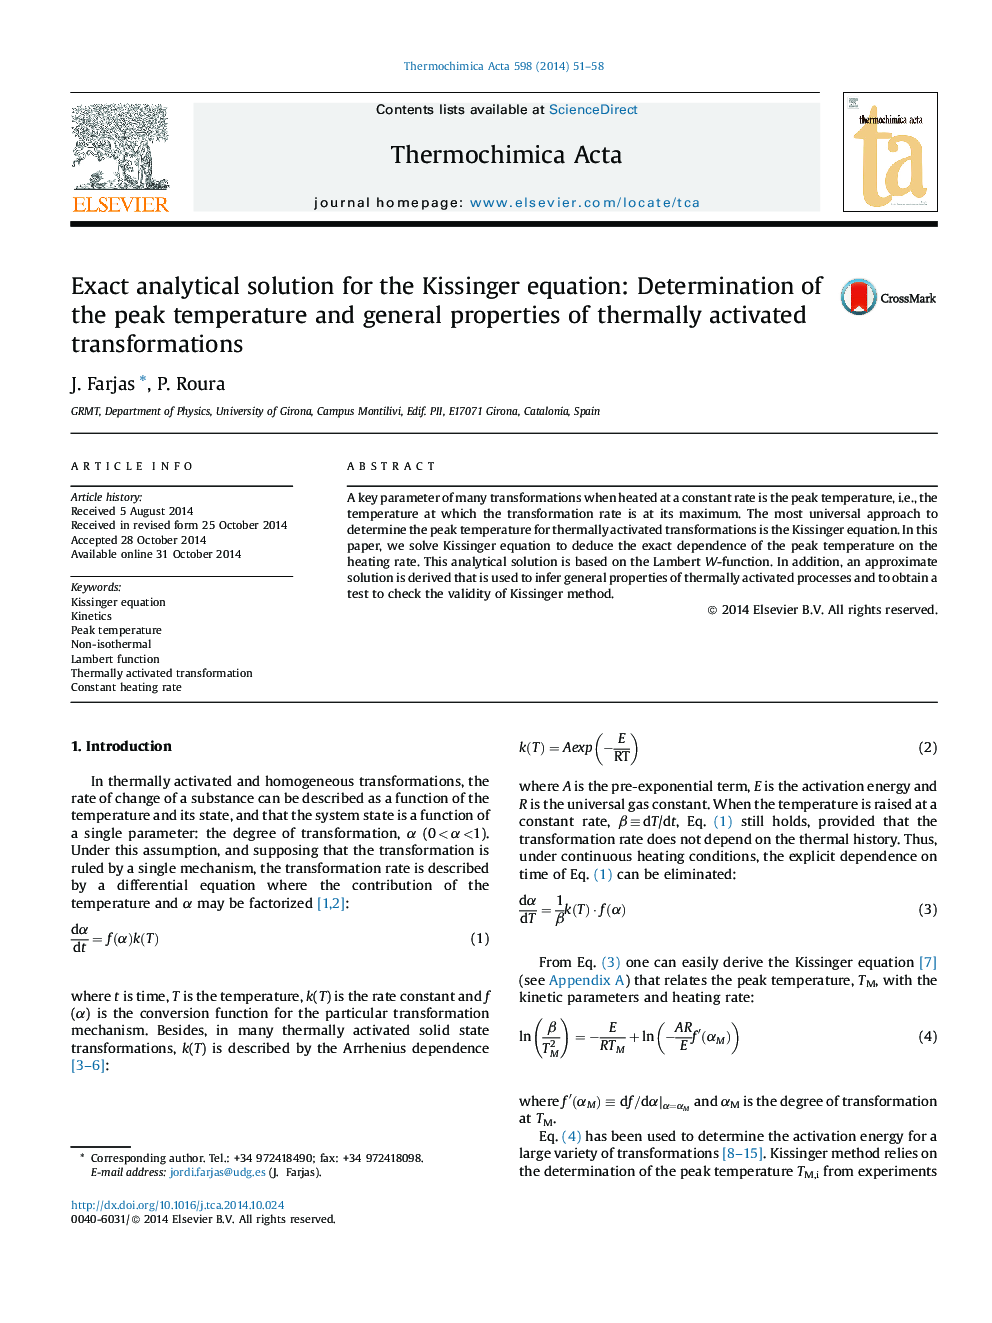 Exact analytical solution for the Kissinger equation: Determination of the peak temperature and general properties of thermally activated transformations